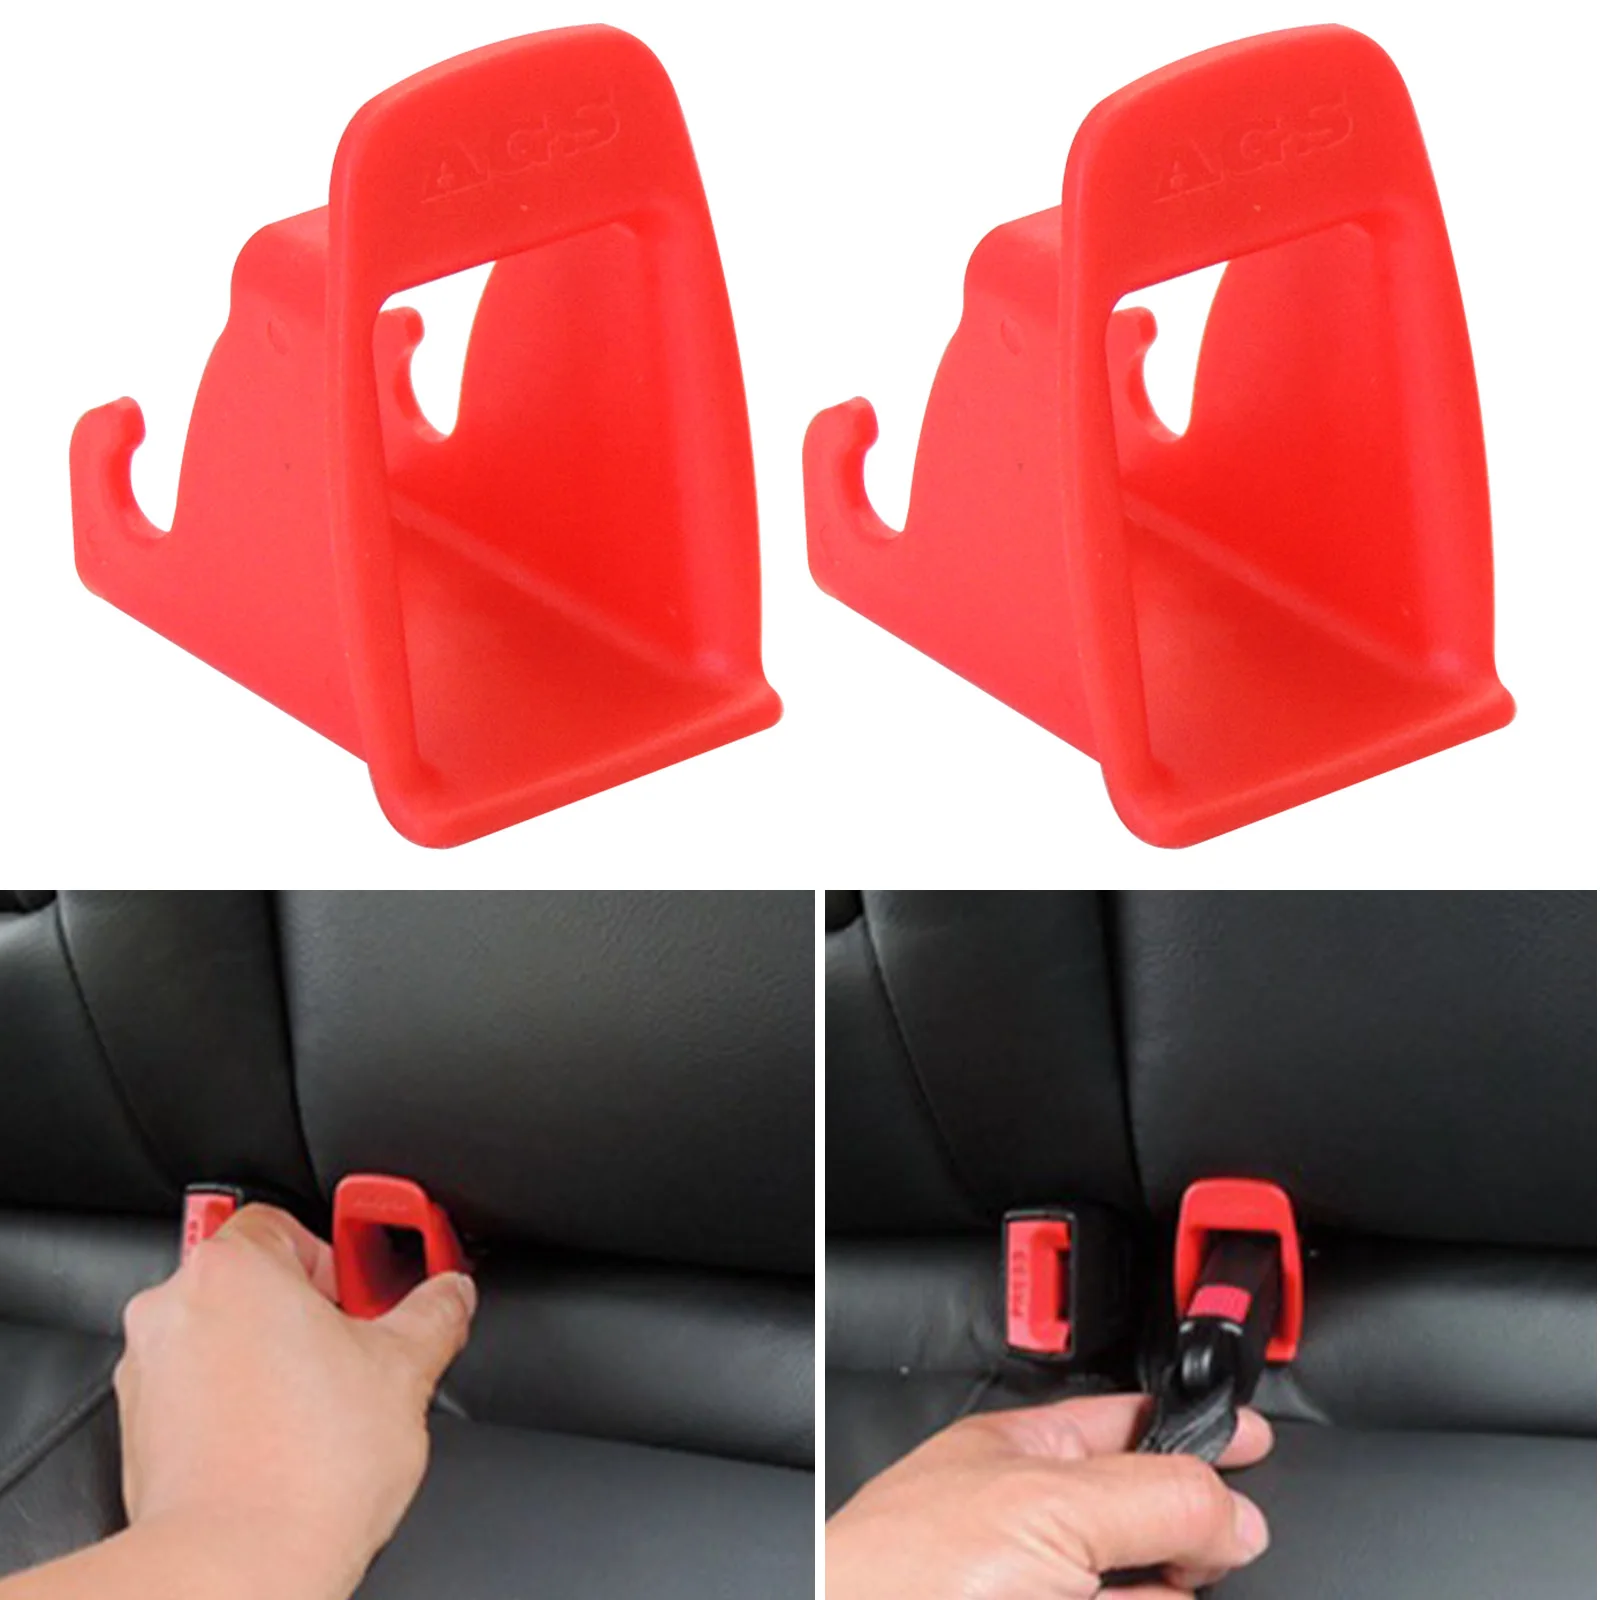 2pcs Car Baby Seat ISOFIX Latch Belt Connector Guide Groove Child Safety Seat Mount Bracket Car Interior Seat Accessories